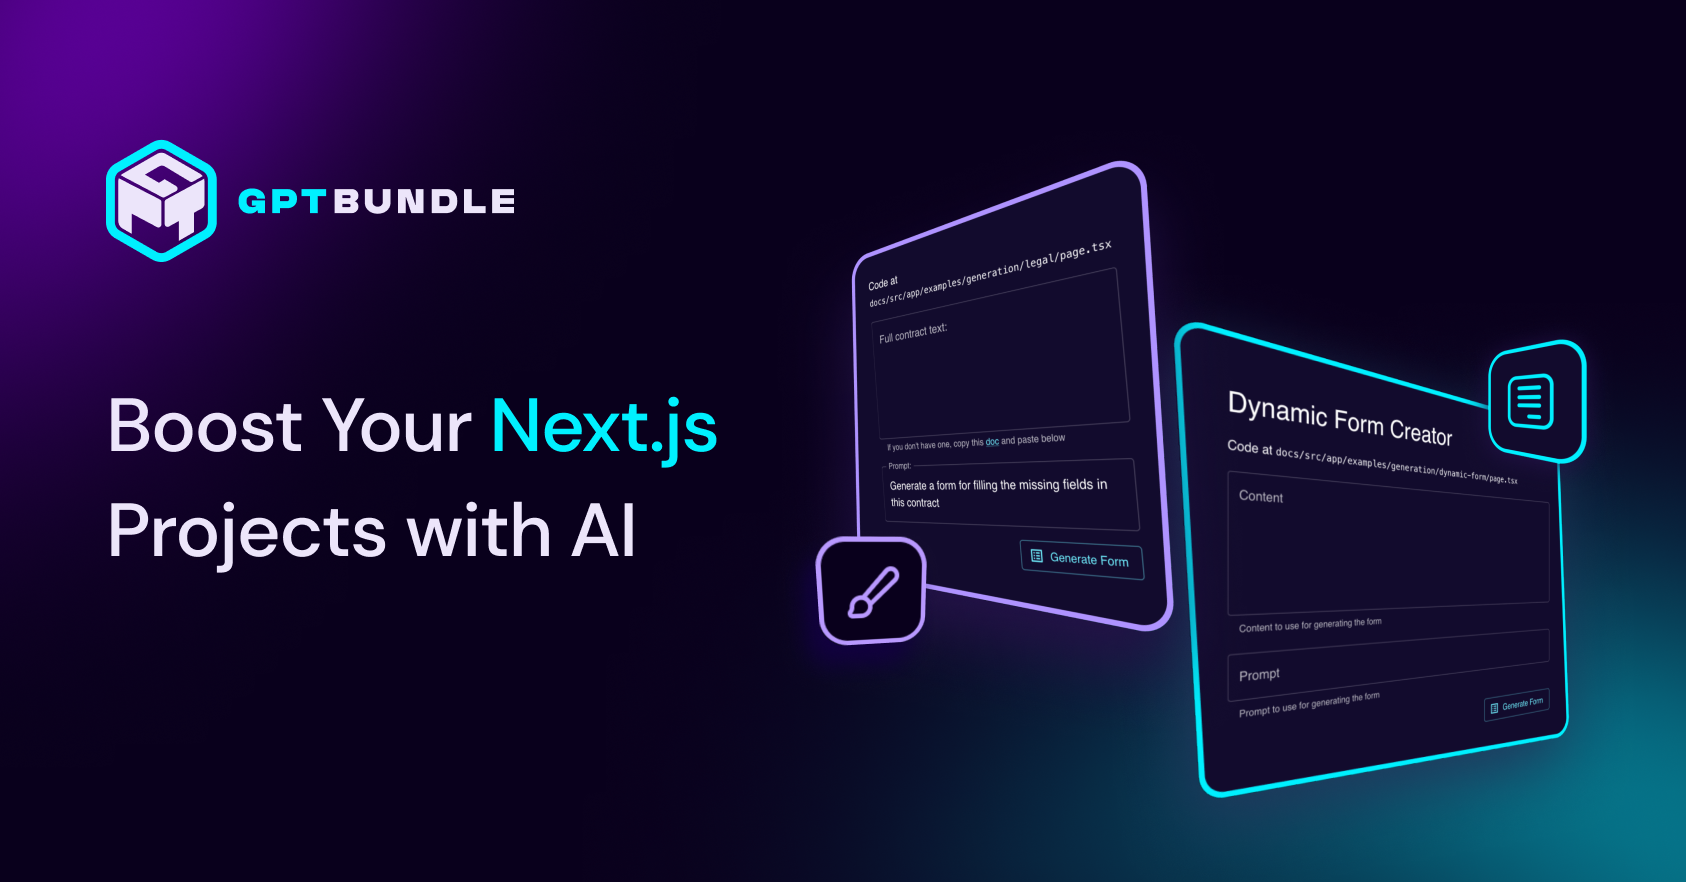 Boost your Next.js projects with AI.